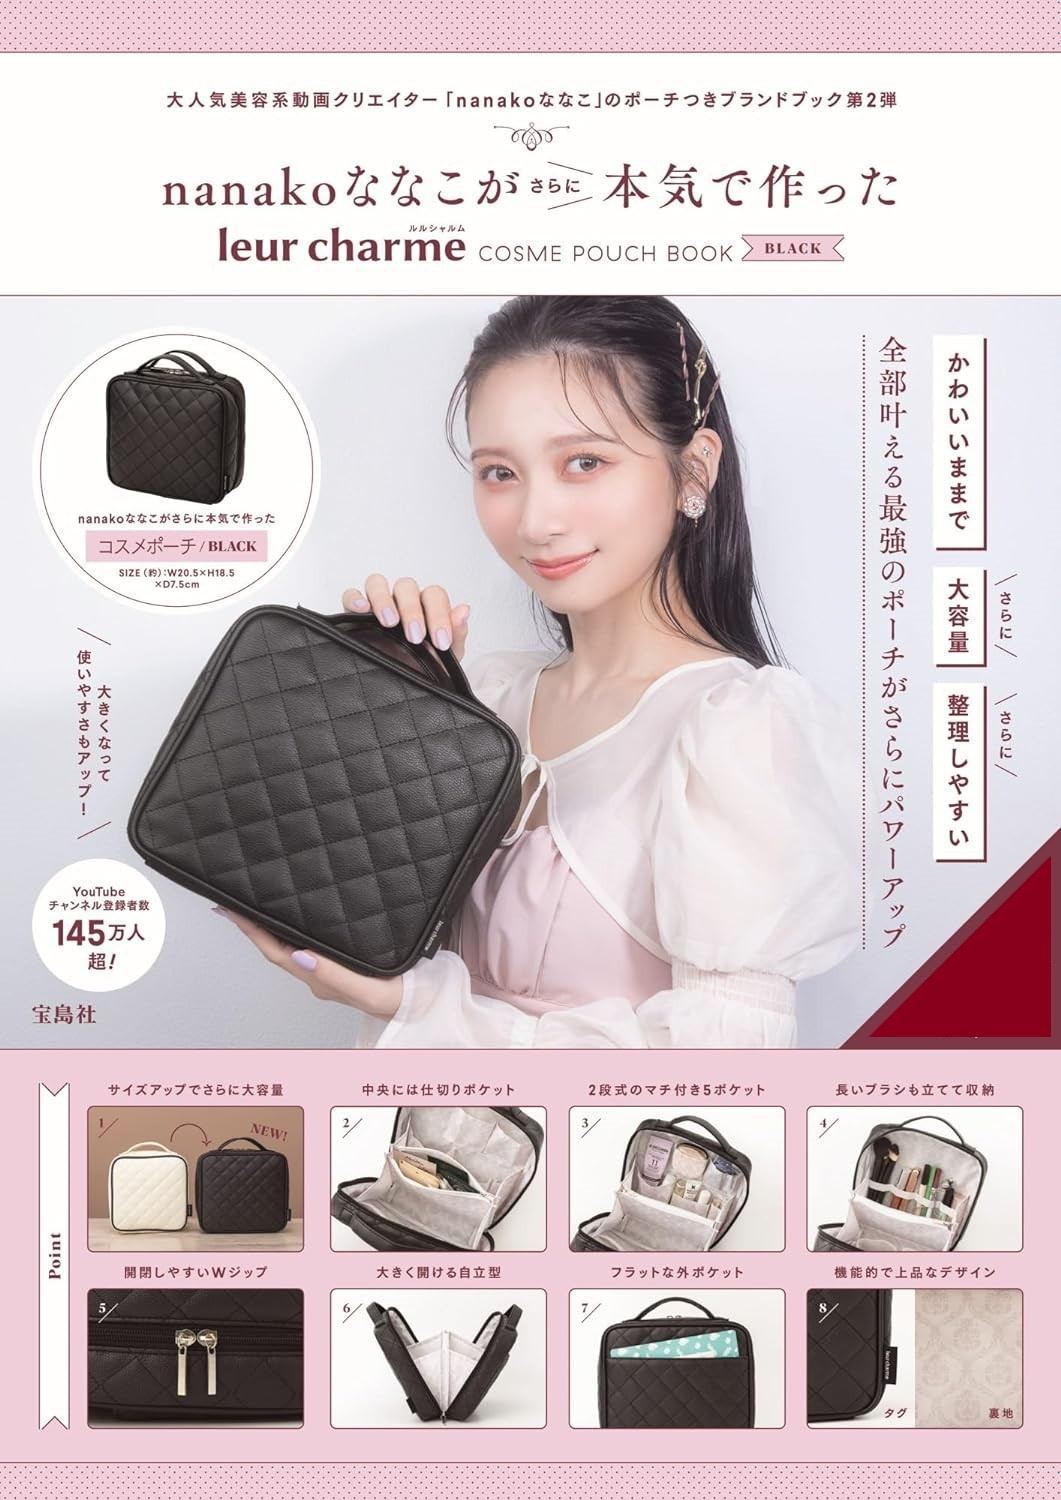 Leur Charme Cosme Pouch Book Black Made By Nanako - Bitcoin & Lightning  accepted